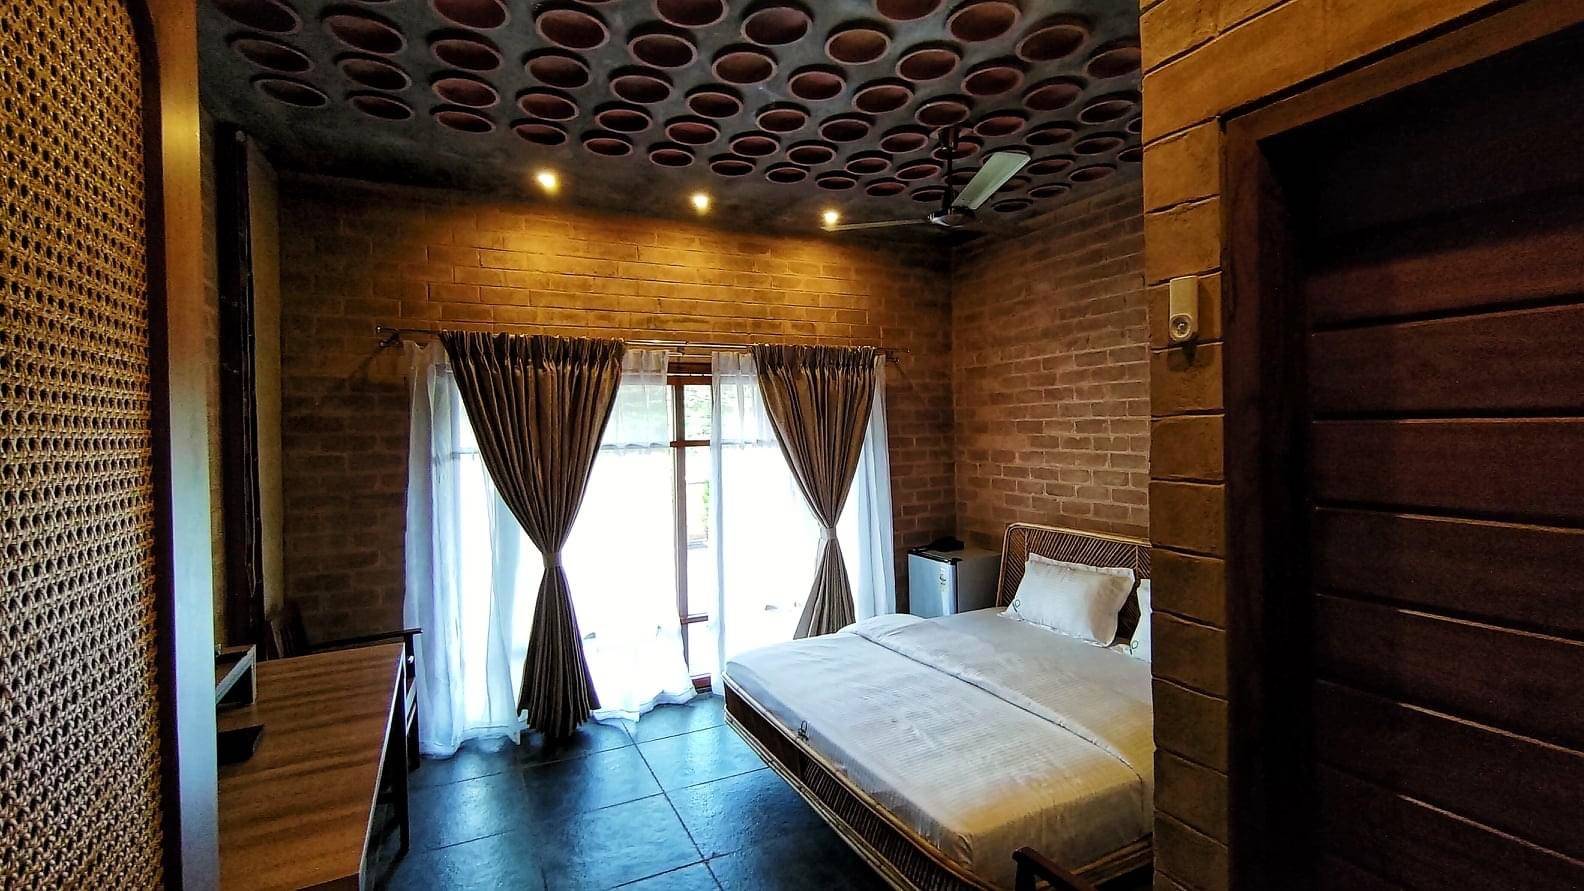 Rooms with aesthetic ceilings at Hotel Sunyata